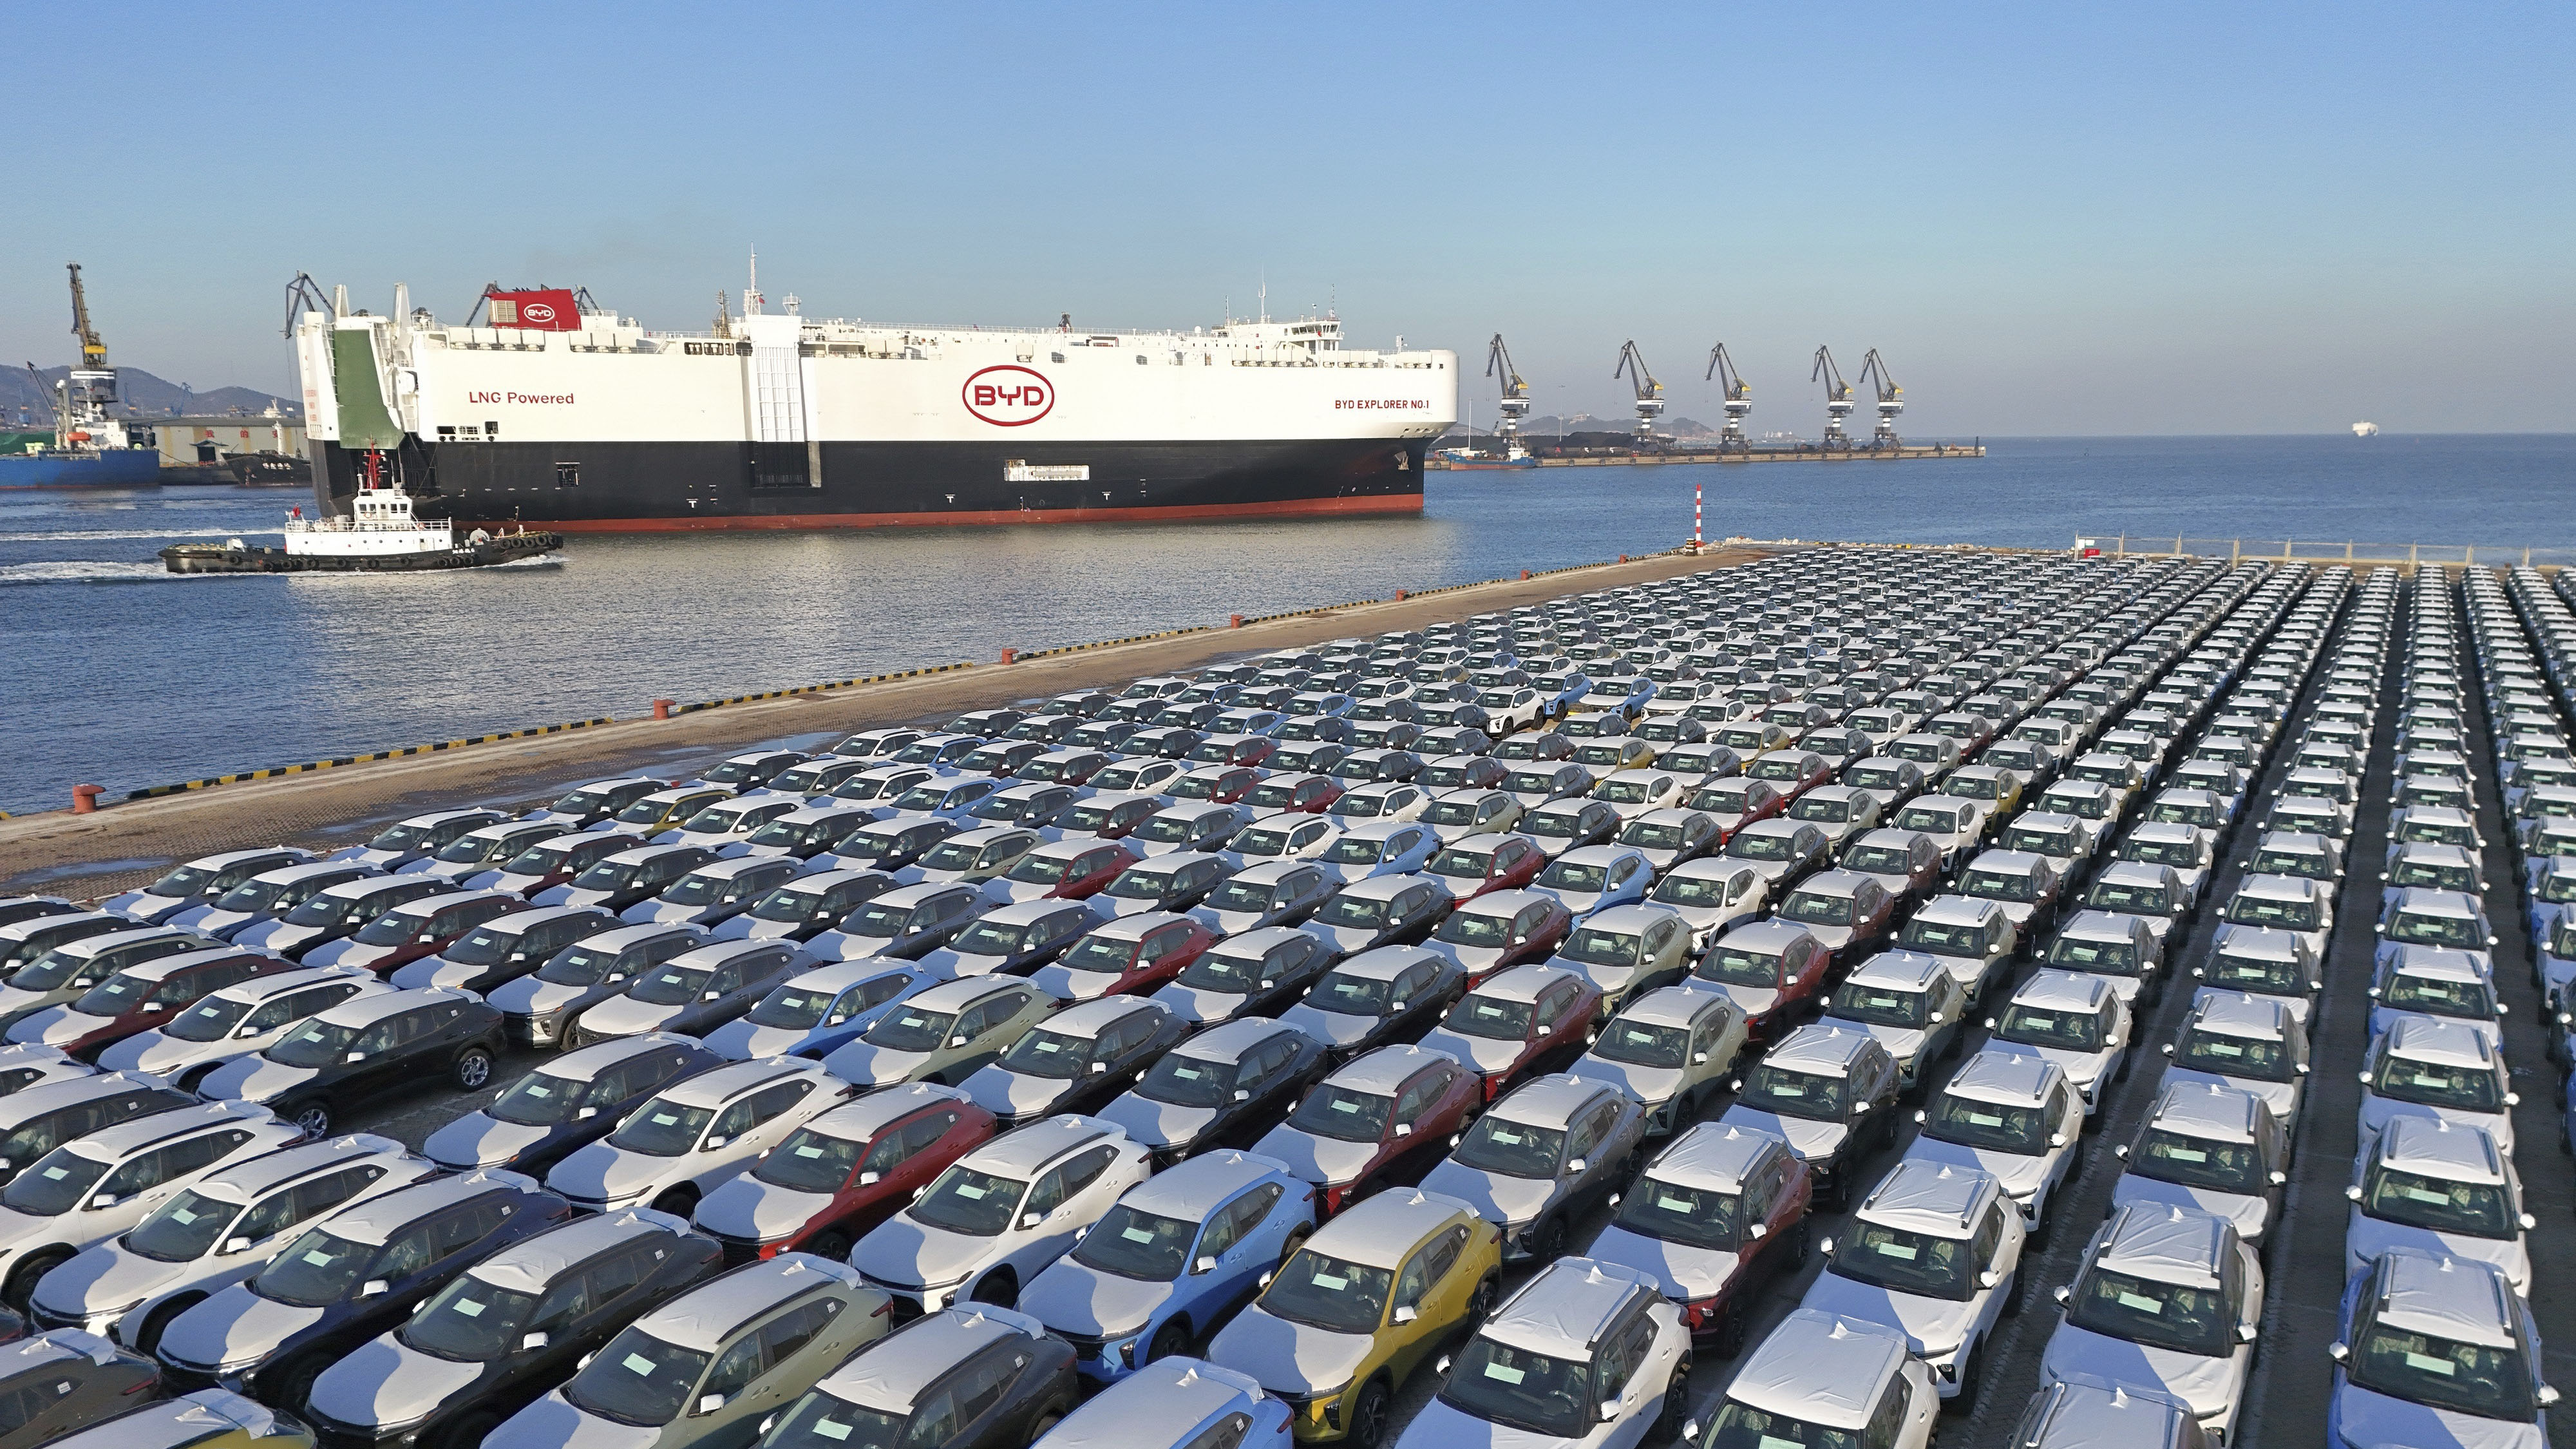 Thousands of cars are shown on a car carrier on a seaport, with a BYD freight boat in the background.